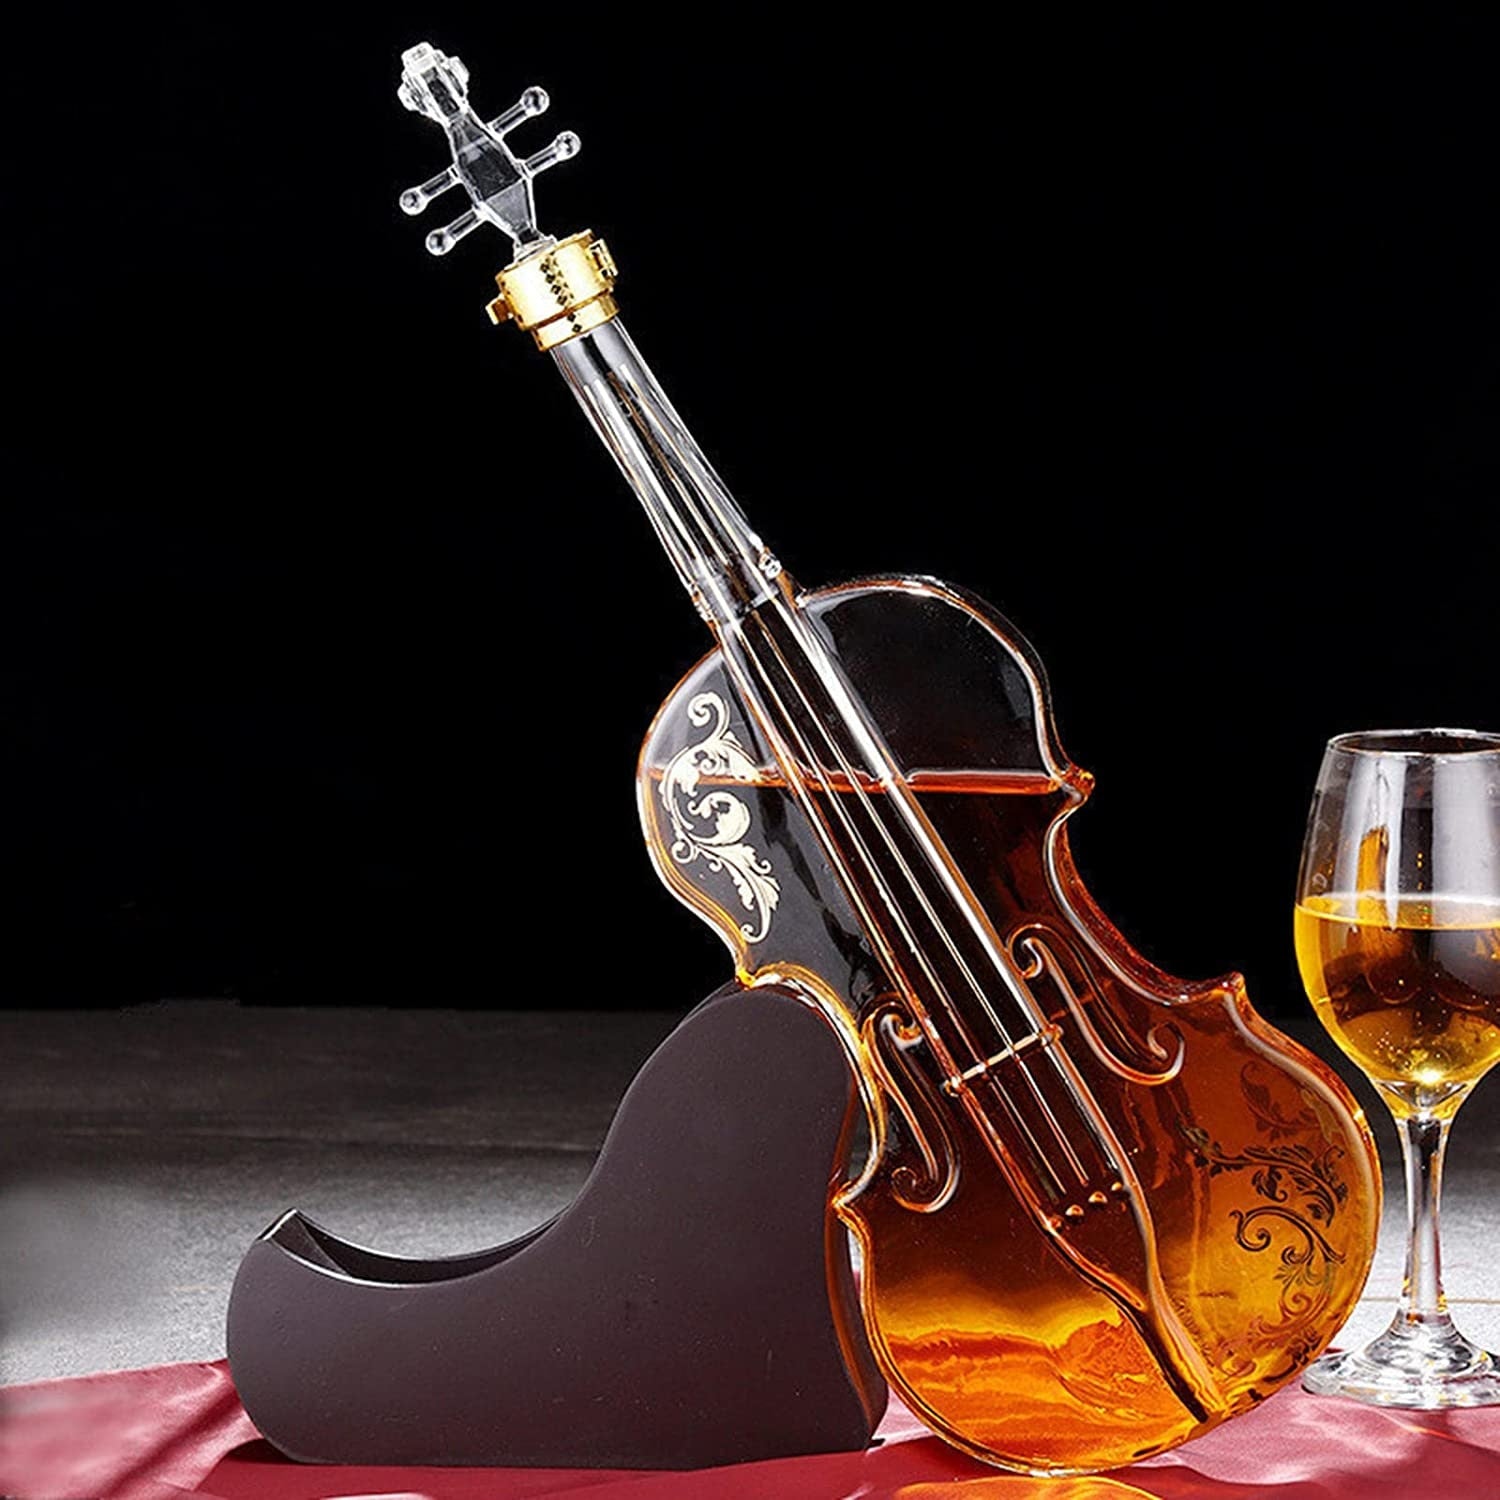 Violin-shaped decanter for classical music lovers